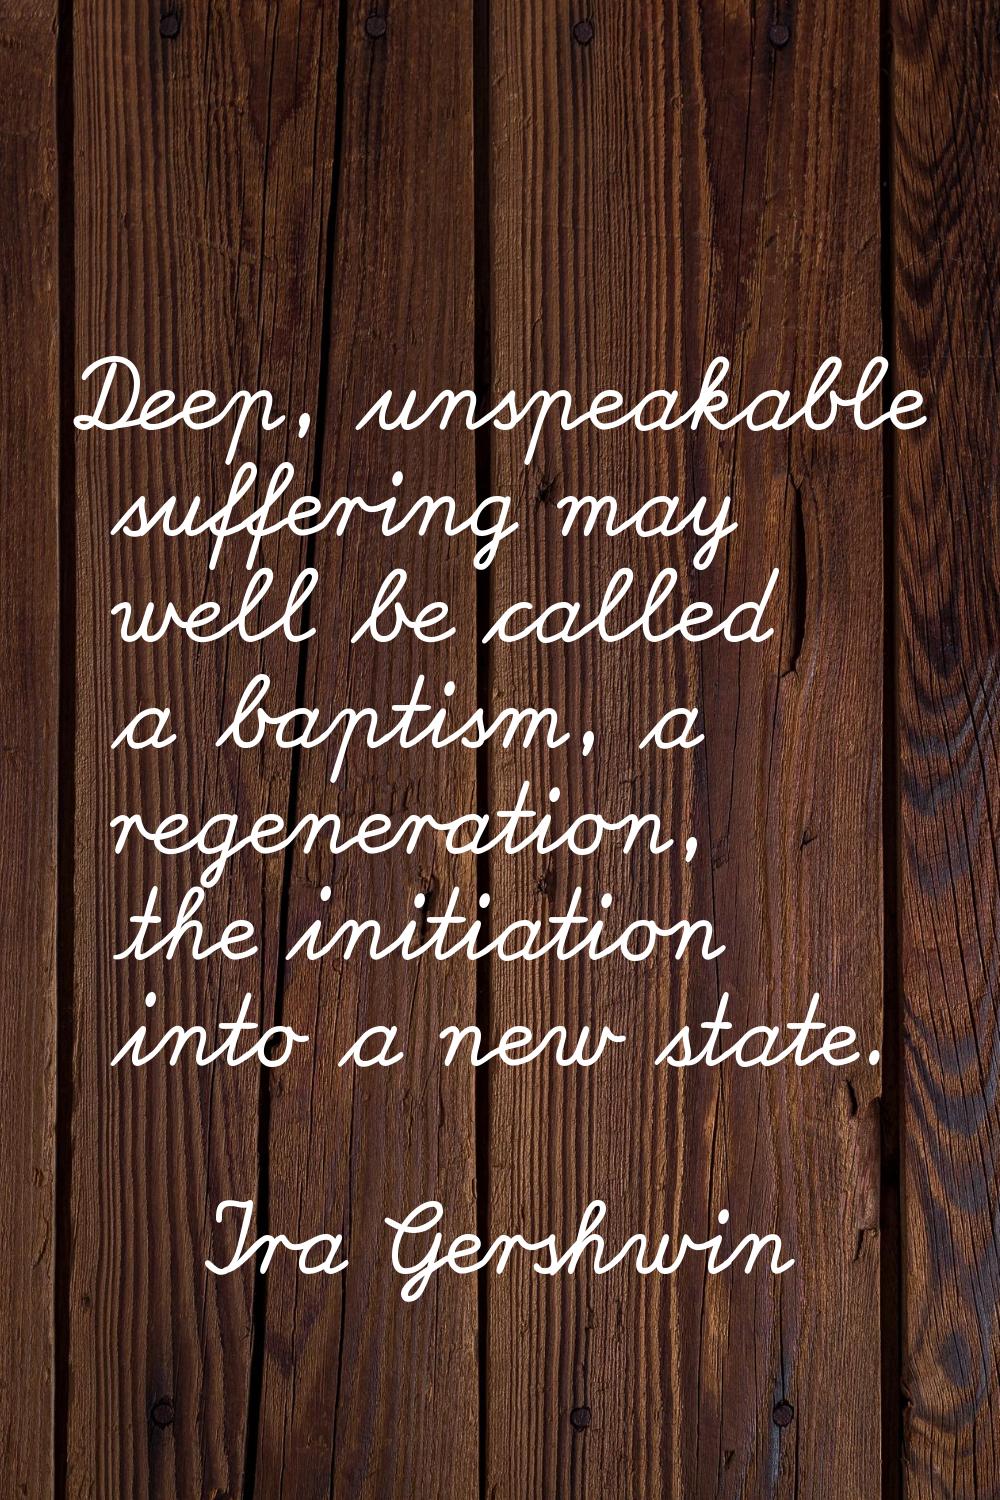 Deep, unspeakable suffering may well be called a baptism, a regeneration, the initiation into a new